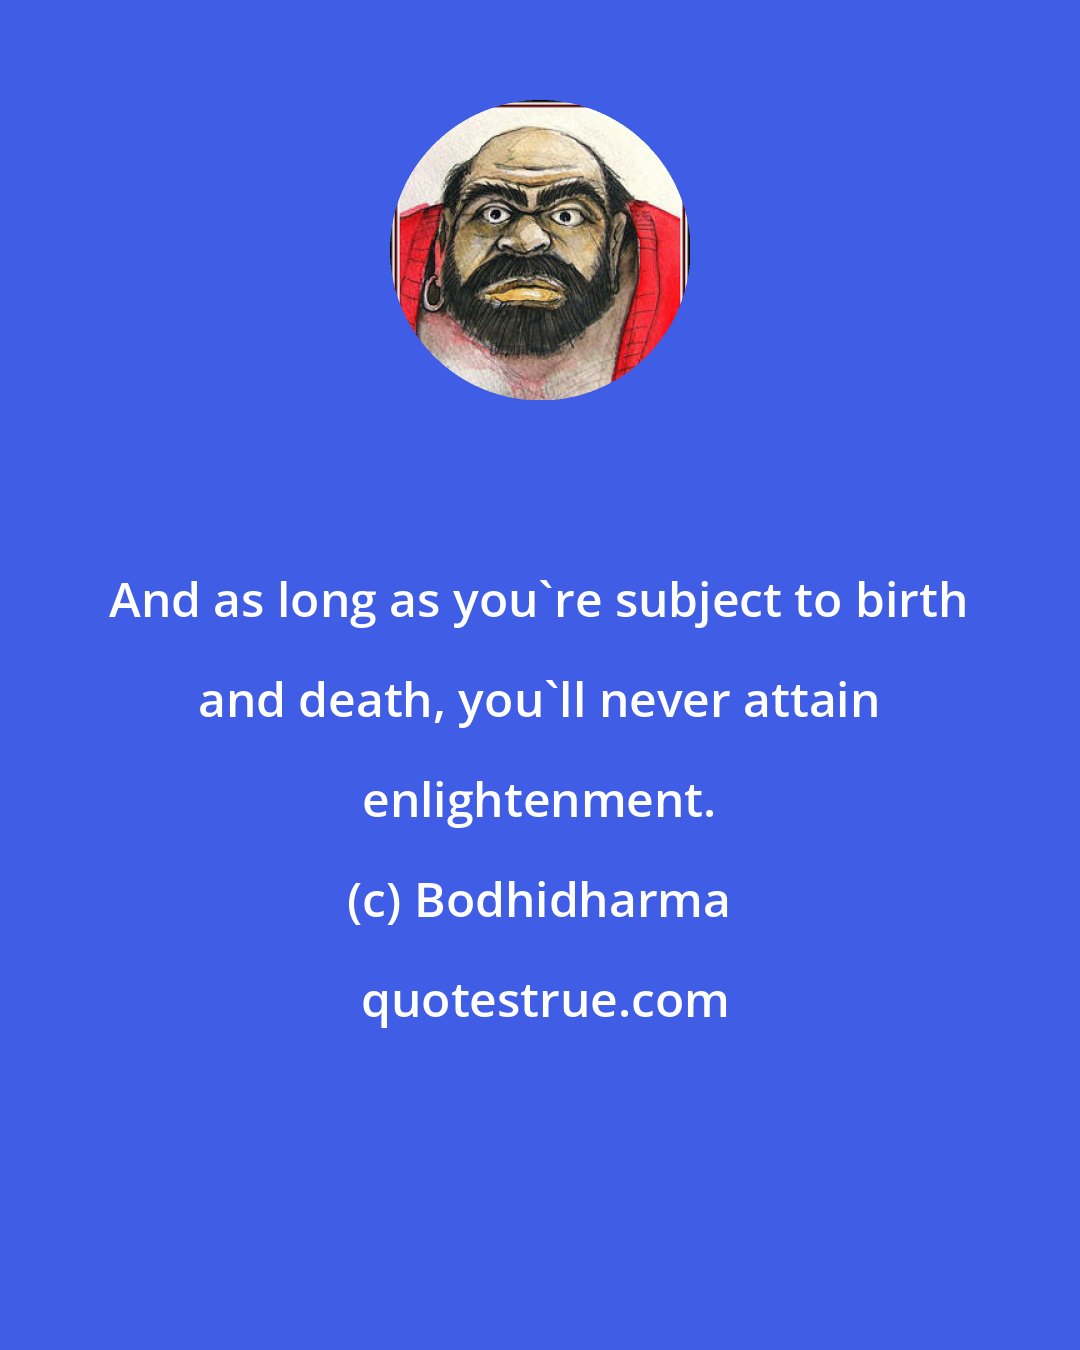 Bodhidharma: And as long as you're subject to birth and death, you'll never attain enlightenment.